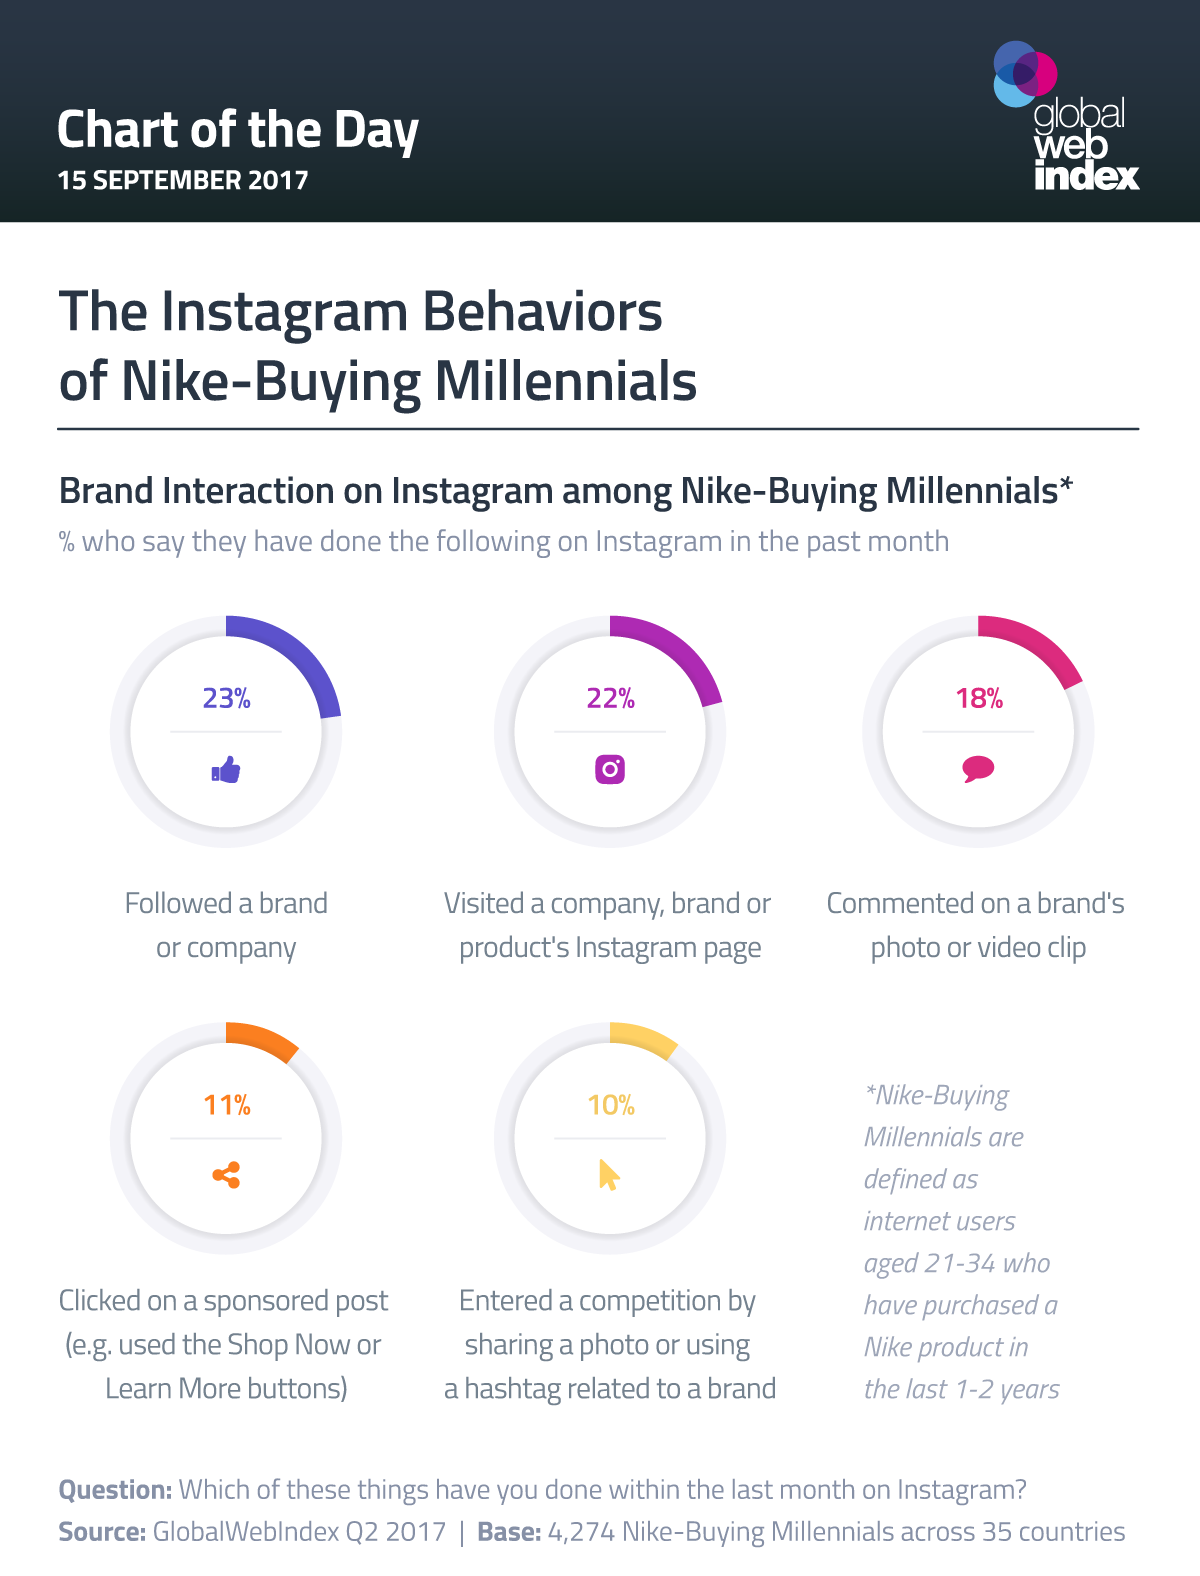 4 in 10 Instagrammers are Nike-Buying Millennials